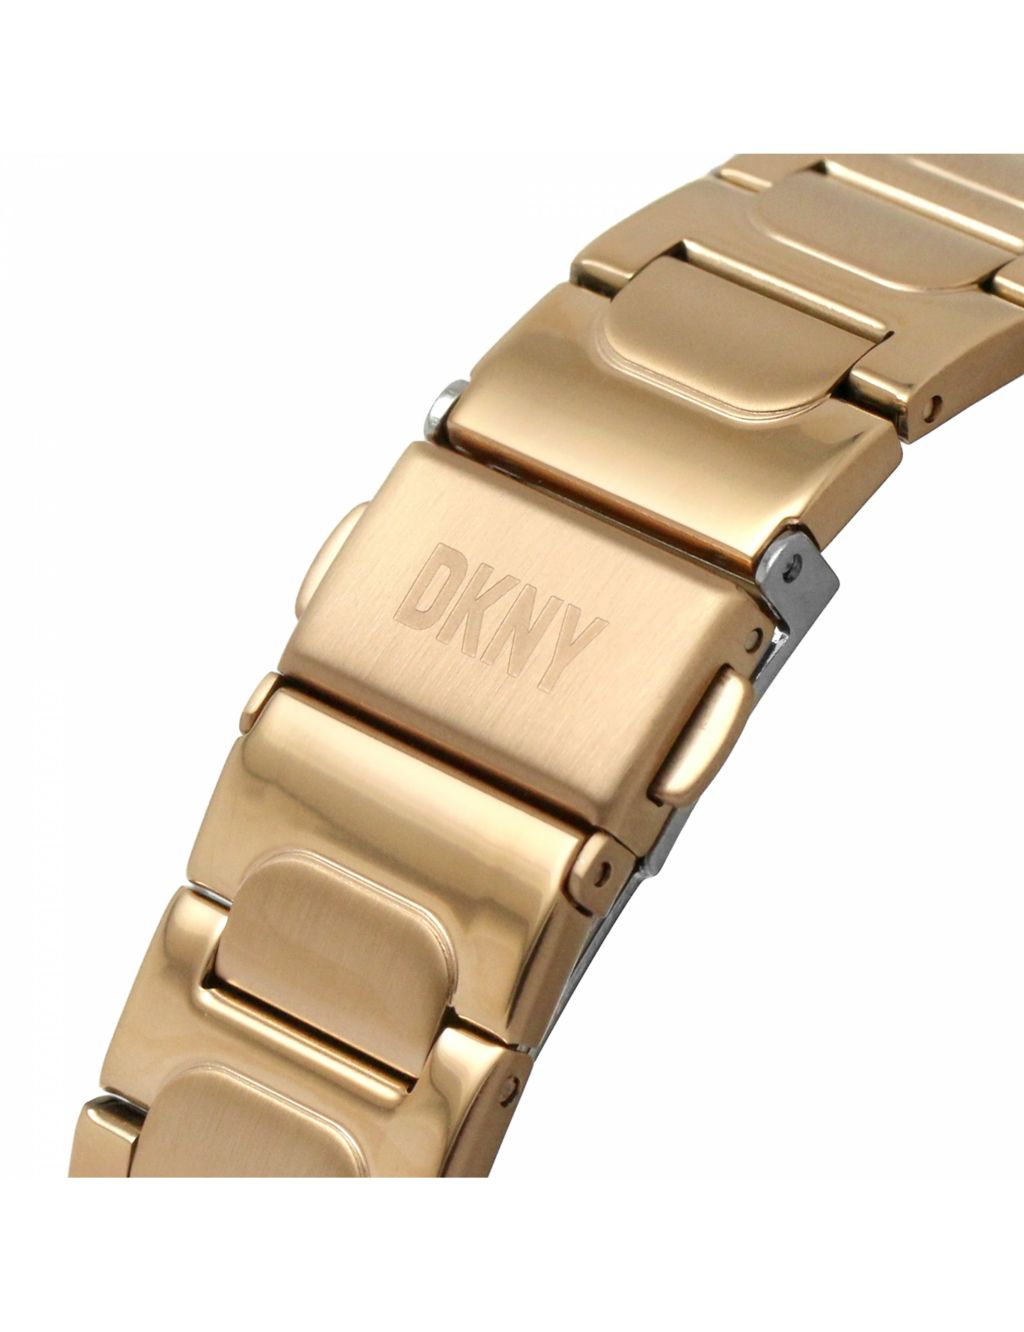 DKNY 7th Avenue Rose Gold Stainless Steel Watch image 6